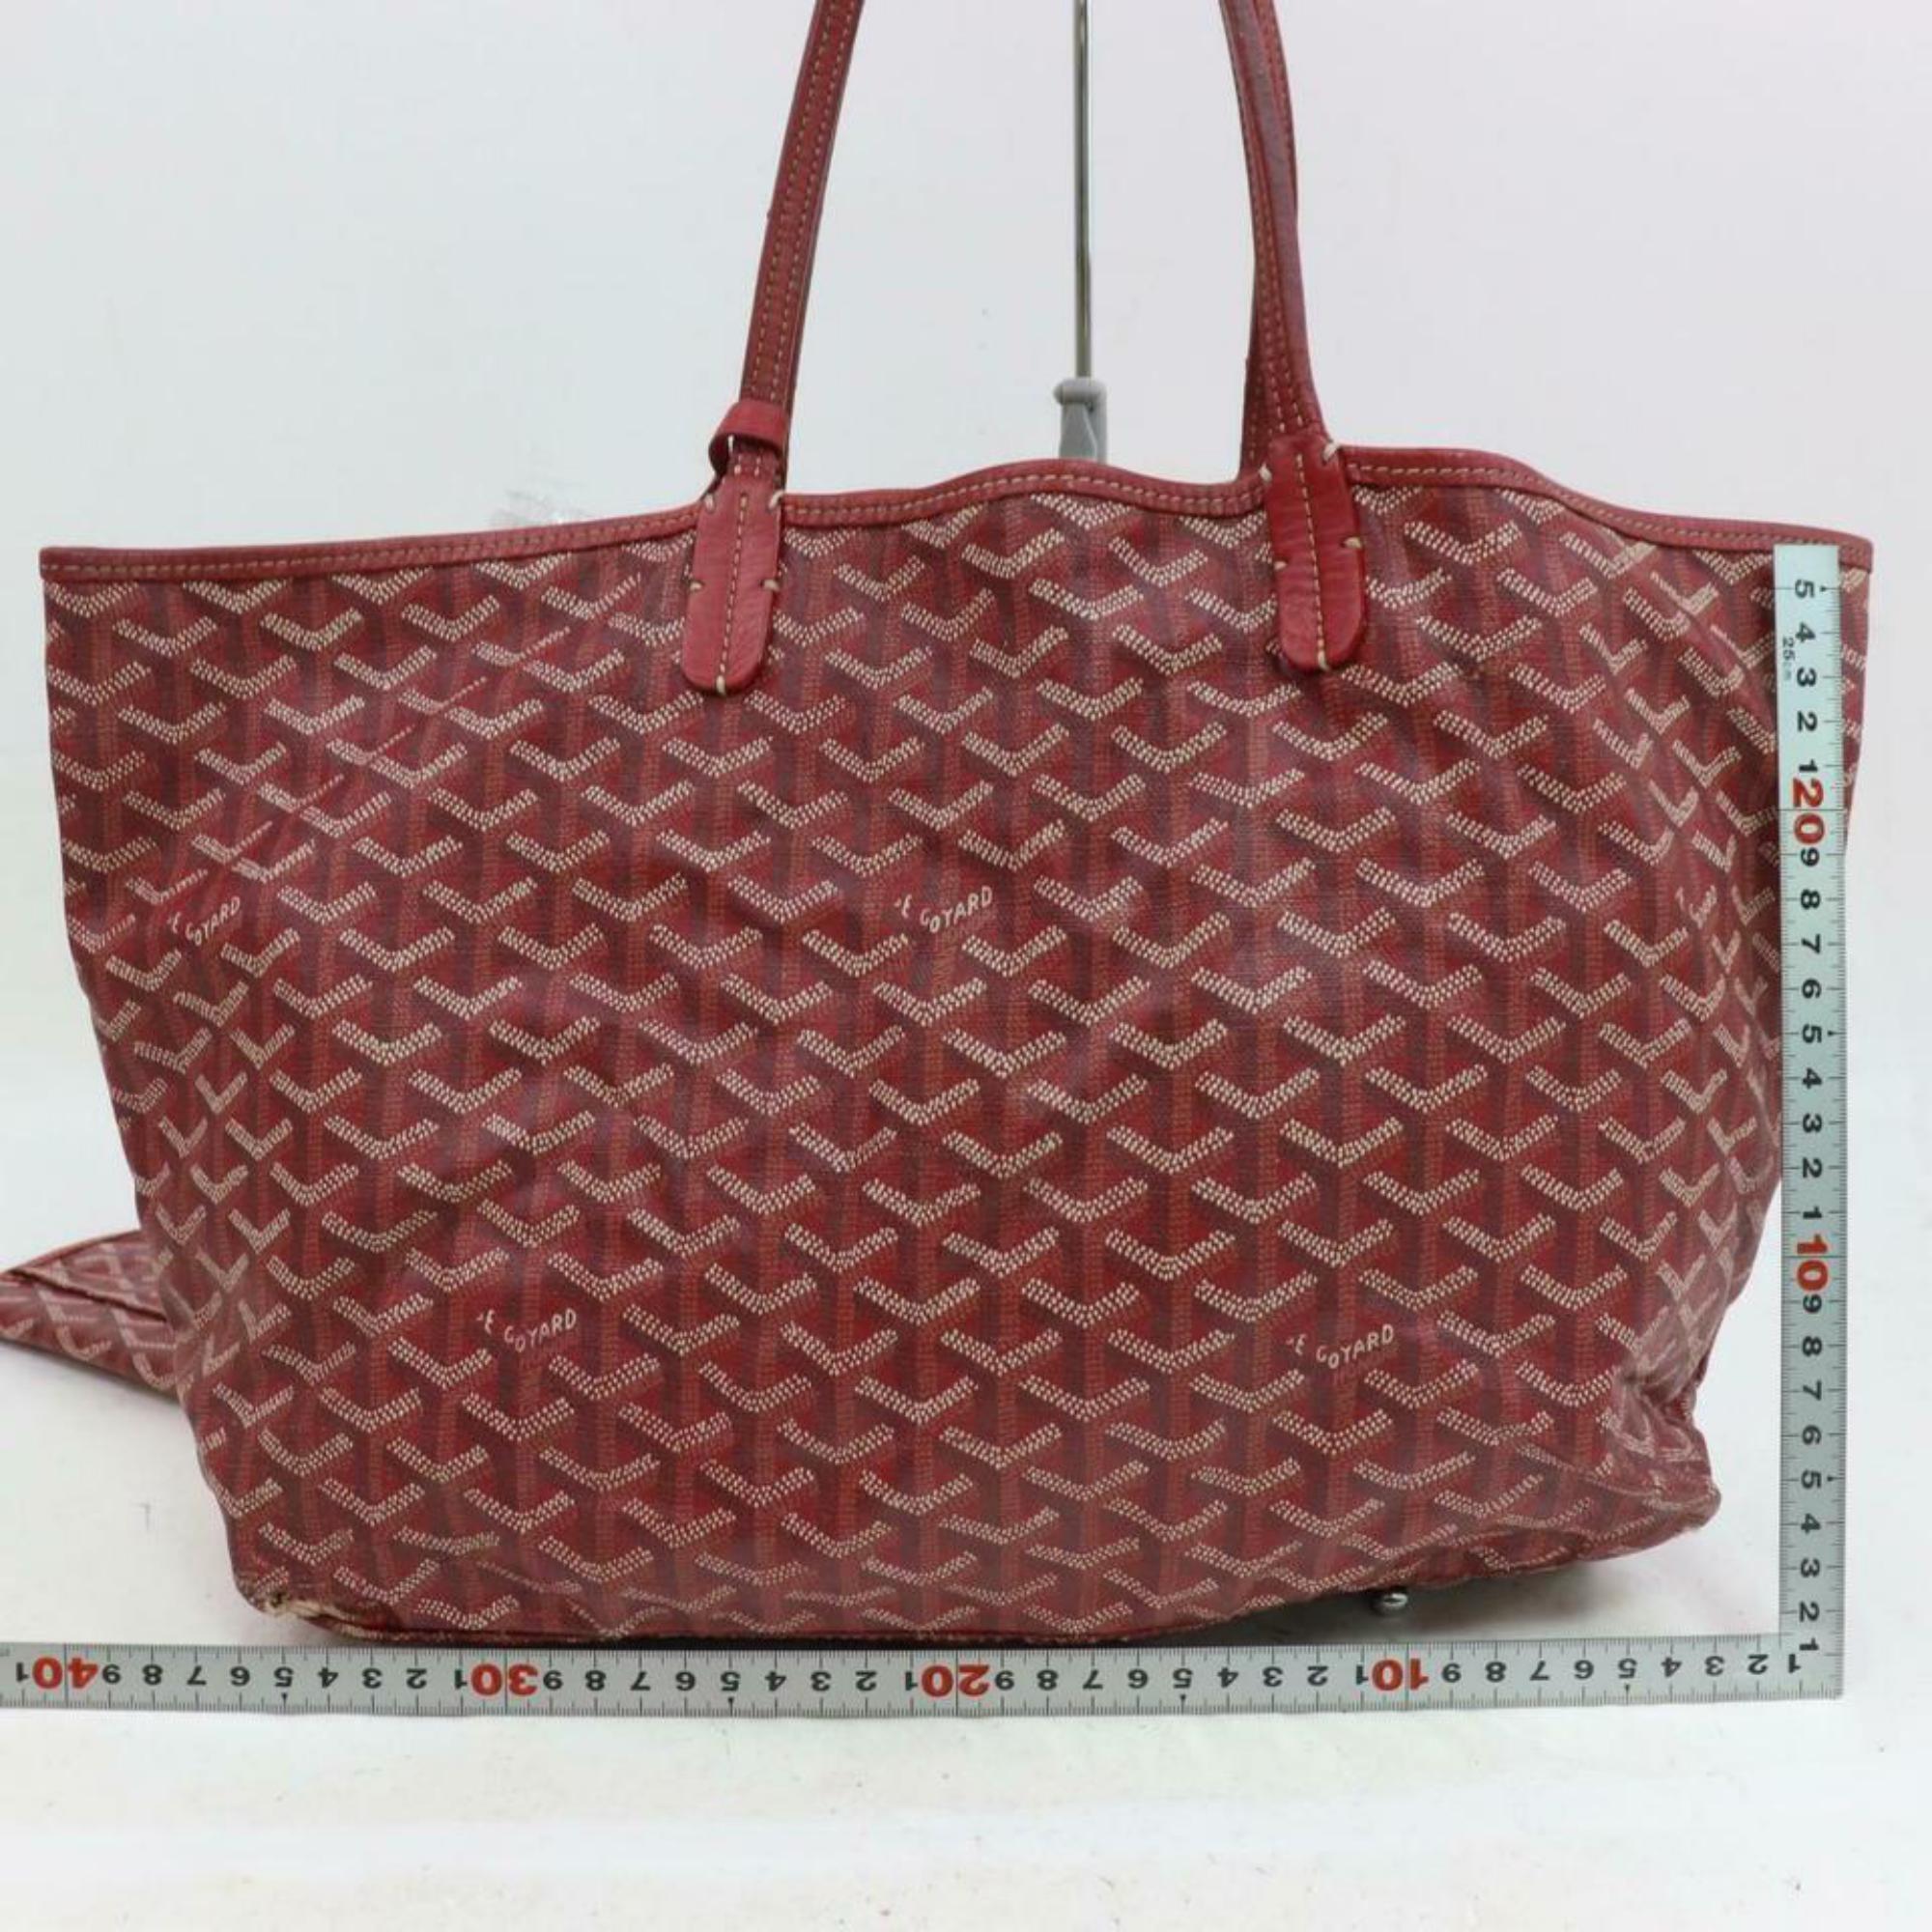 Goyard Bordeaux Chevron St Louis with Pouch 870626 Burgundy Coated Tote In Fair Condition For Sale In Forest Hills, NY